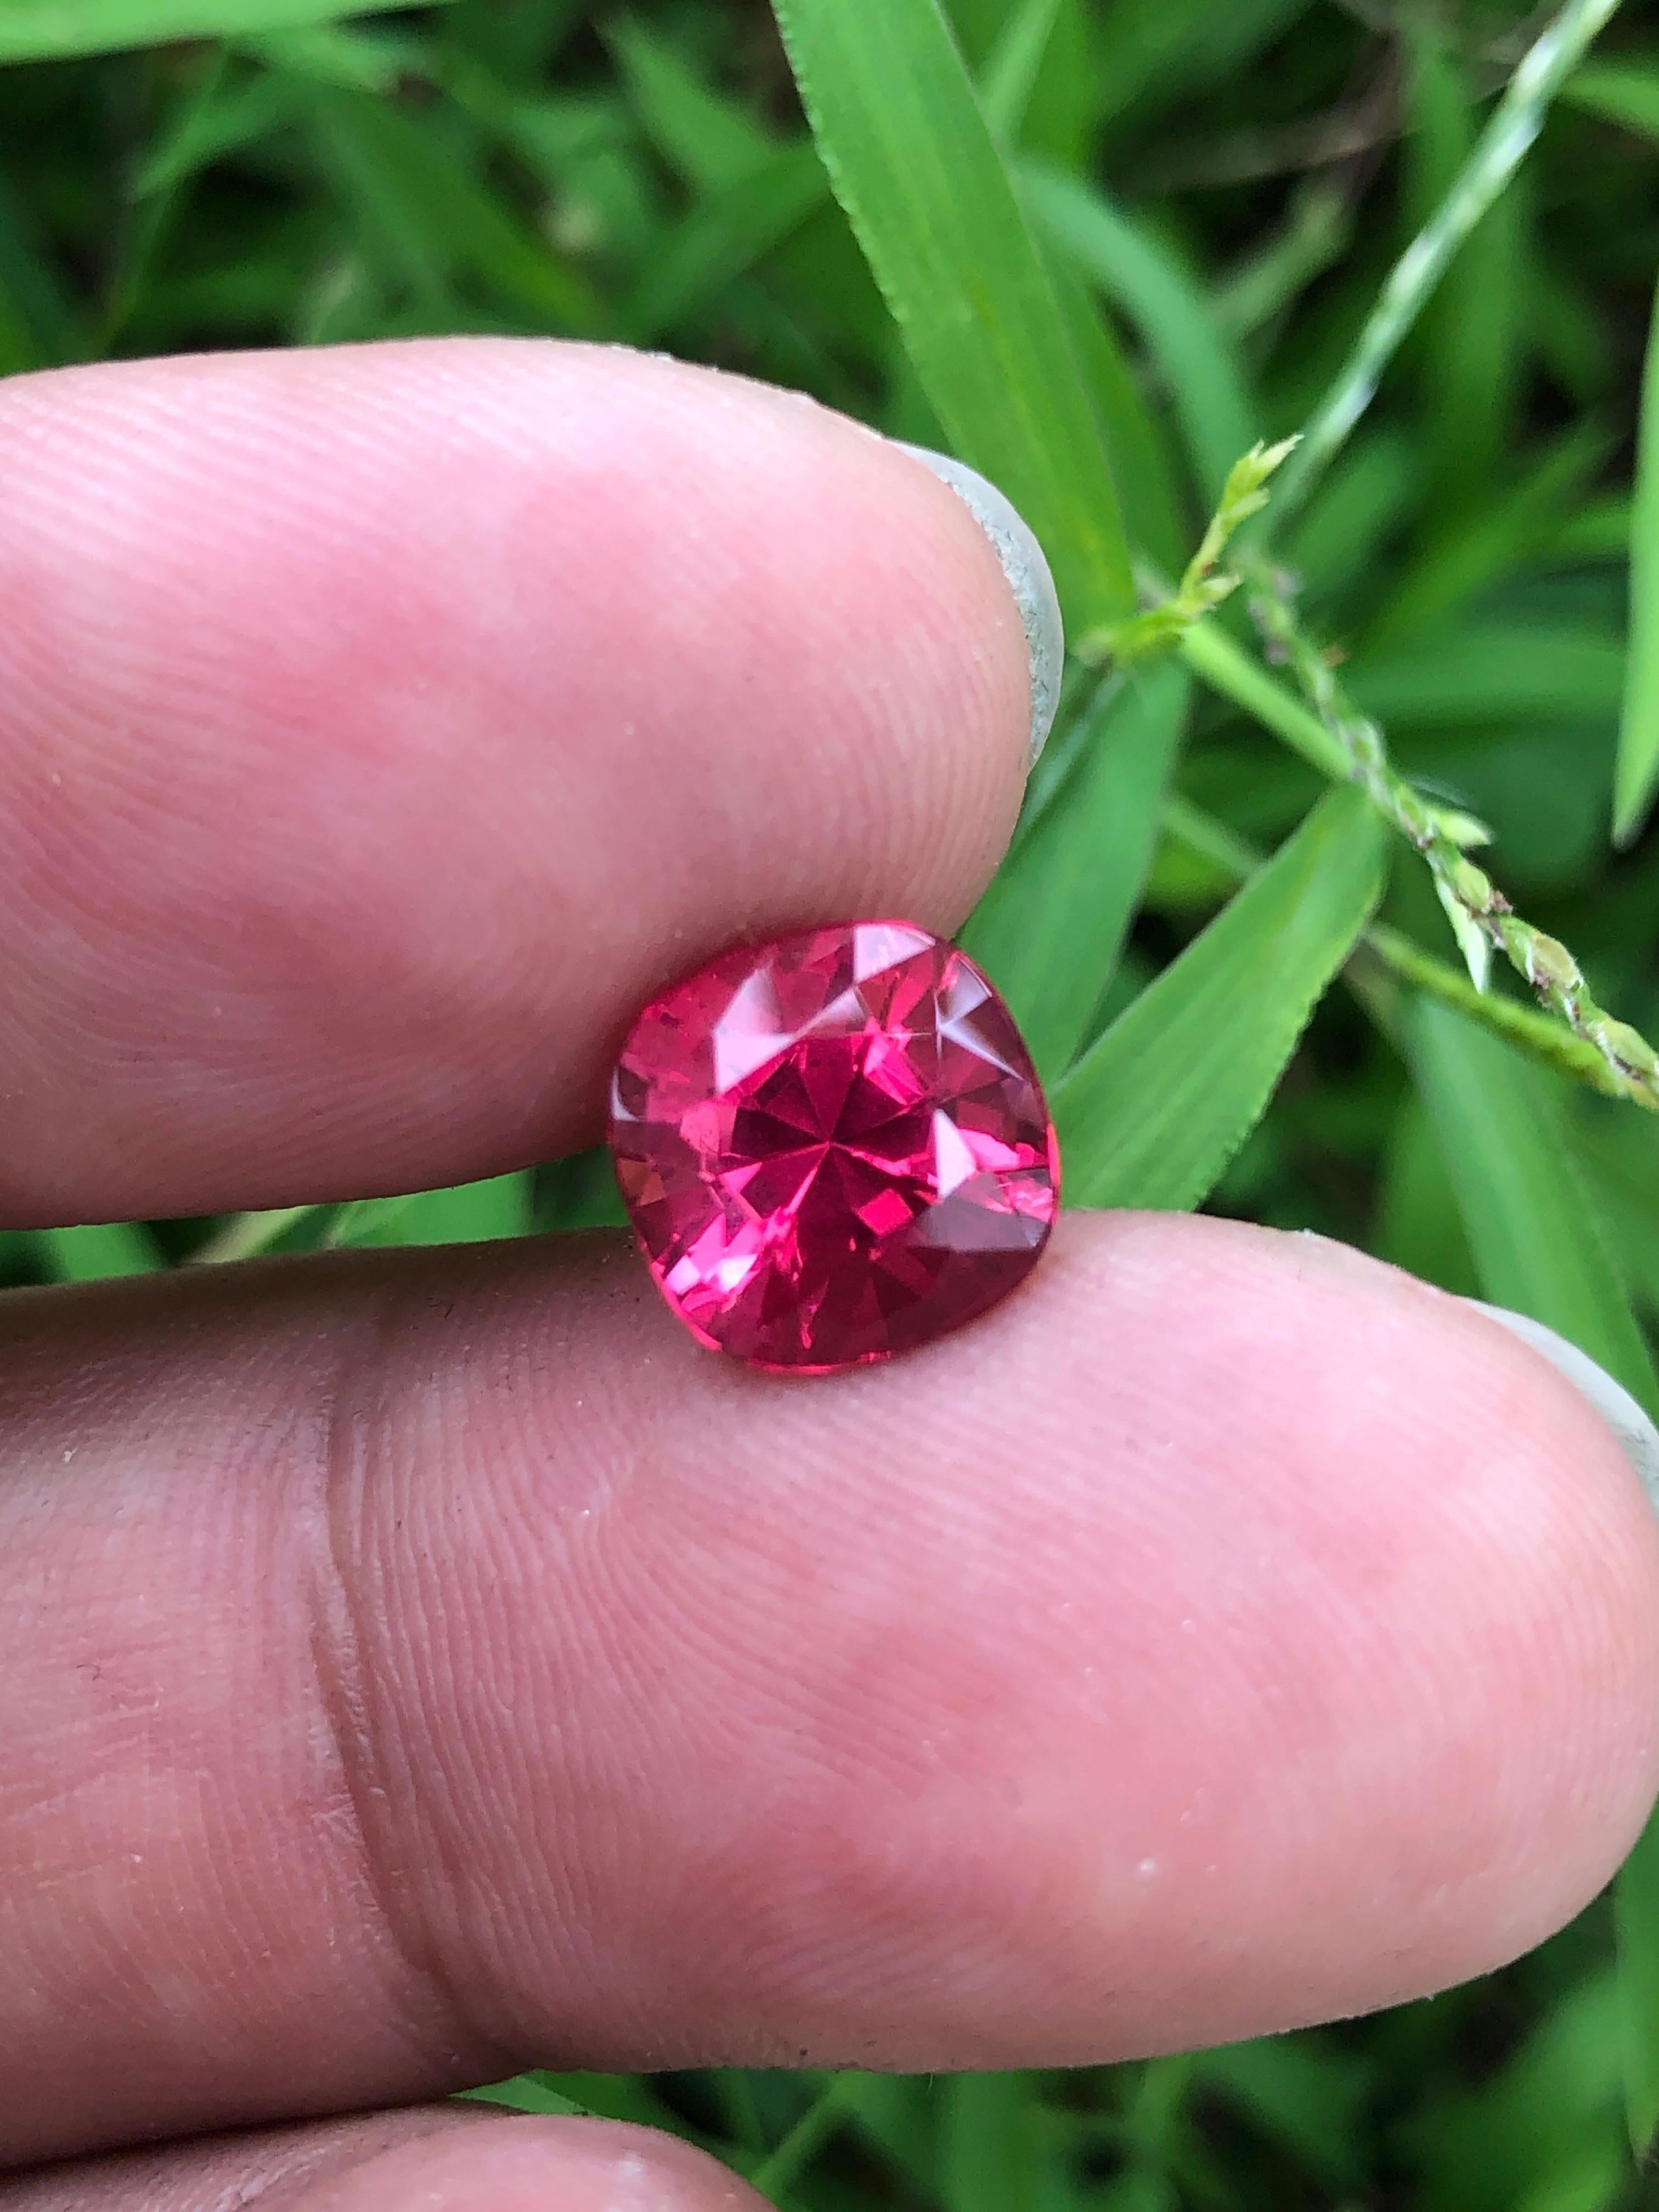 Introducing a stunning 4-carat Mehengi Spinel loupe-clean gem with exceptional top color. Elevate your collection with this exquisite piece of natural beauty. Limited availability,
——————————————————-
Stone💎:Spinel 
Color💈: Hot Pink 
Clarity💧: